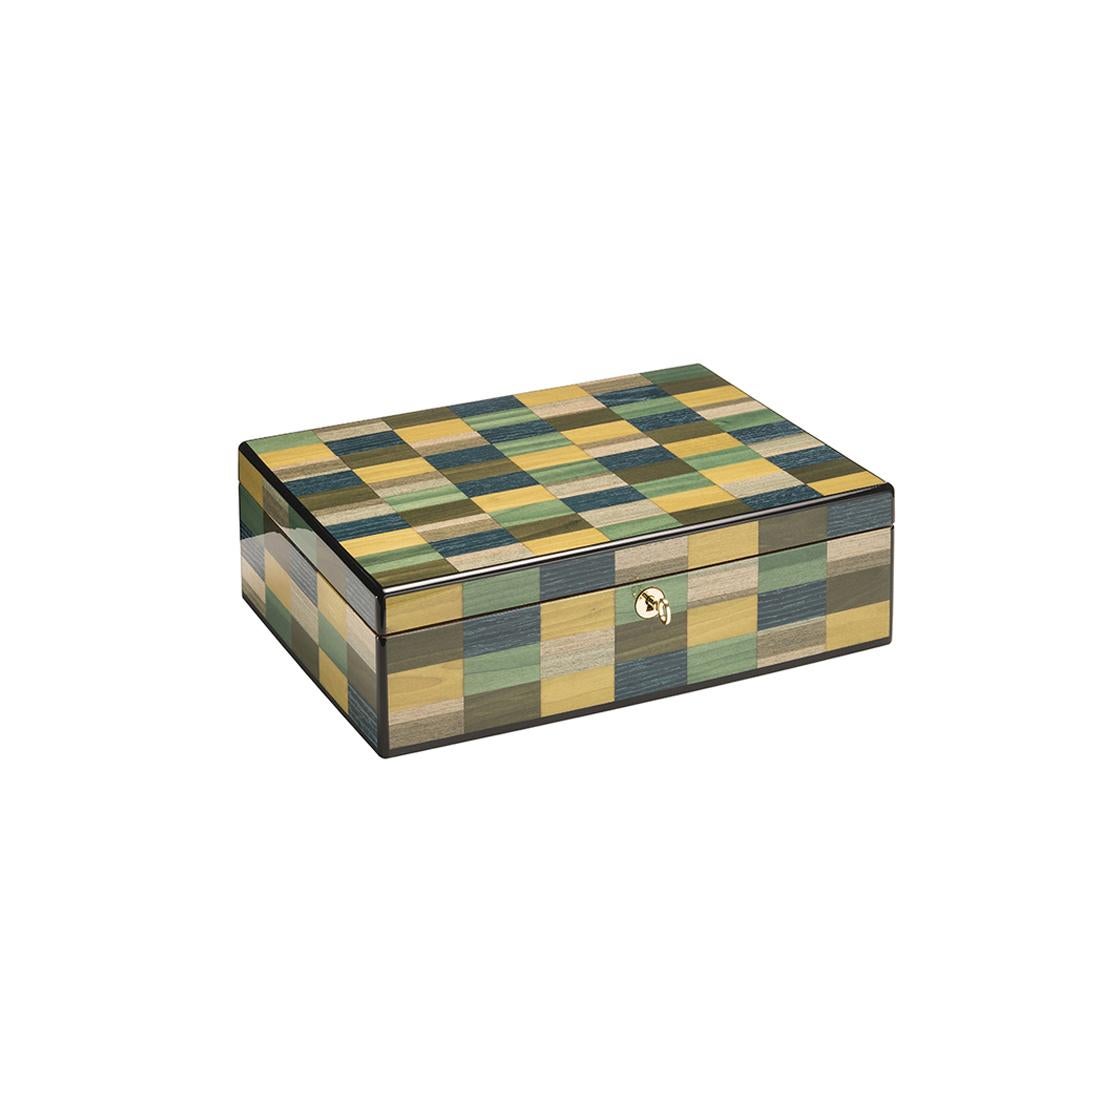 A splendid piece of functional decor fit for a private office or studio, this pen case is distinguished by an exquisite handmade inlay work of a series of colorful rectangles of modern inspiration. Enriched with gold-finished metal details, it is